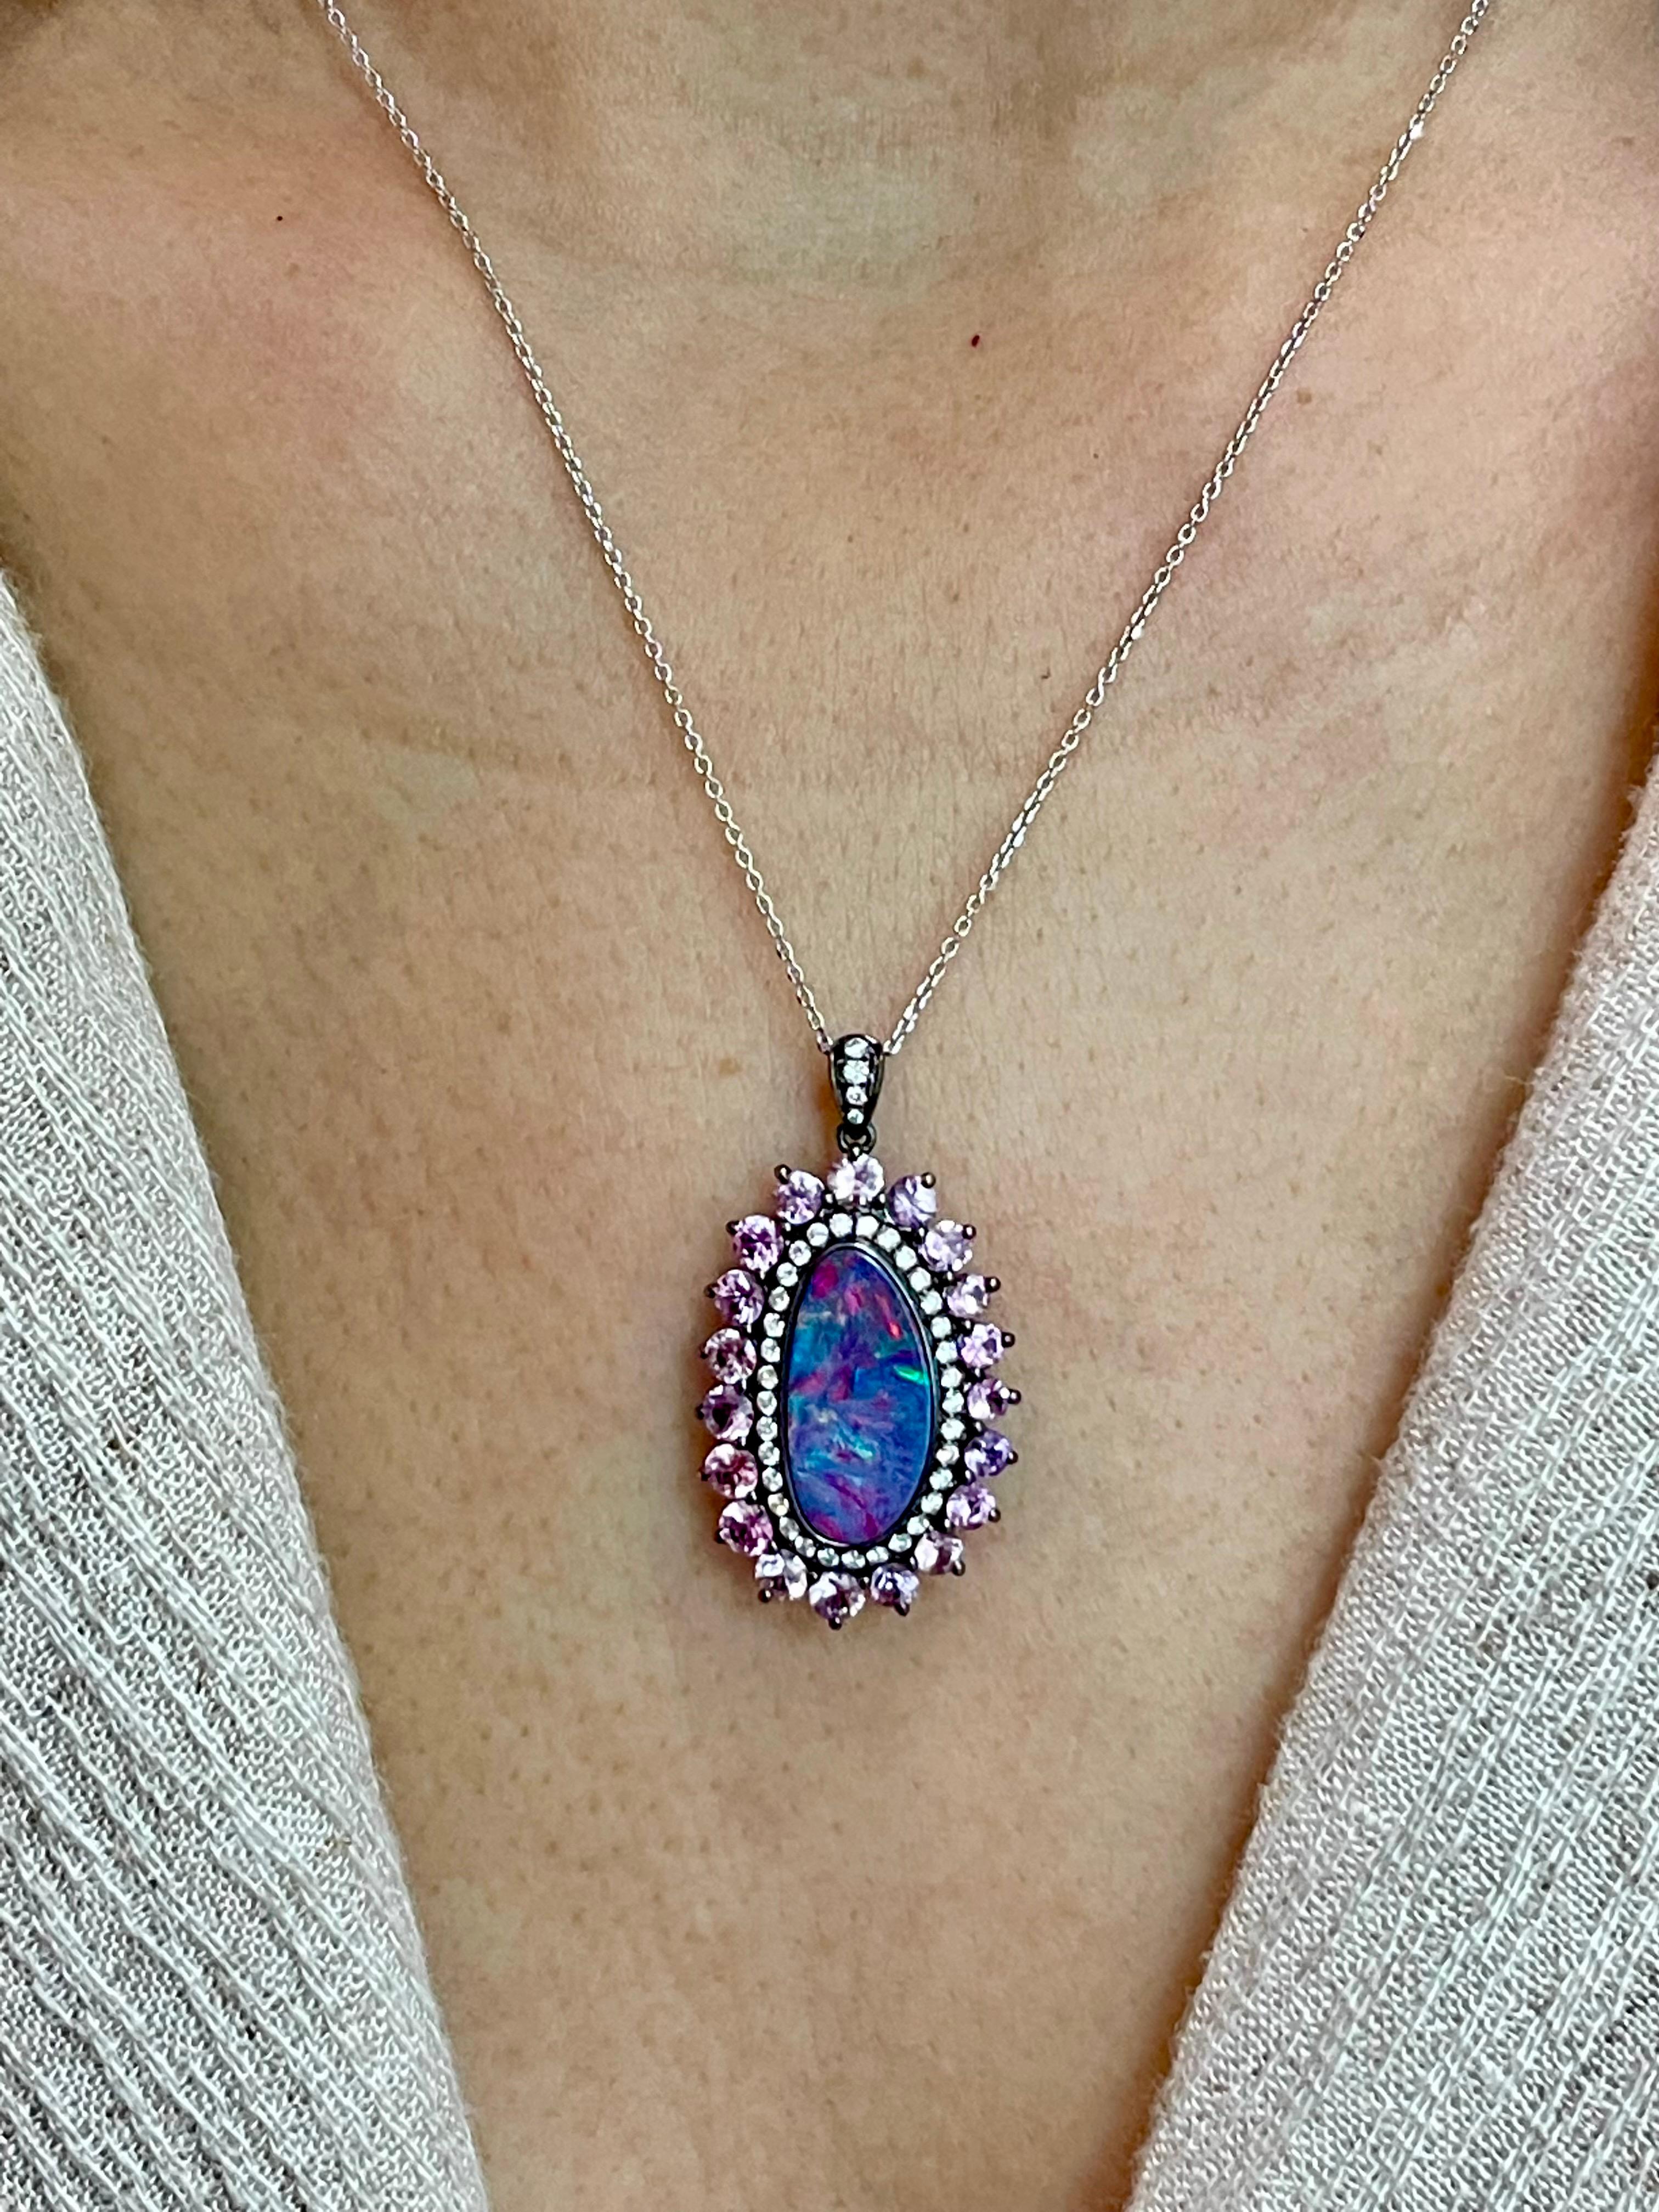 Please check out the HD video! This is an Australian doublet Opal! When it comes to opals, one of the most important character people look for is the play of color. The Australian opal in this pendant has superb play of color. Its got all the main